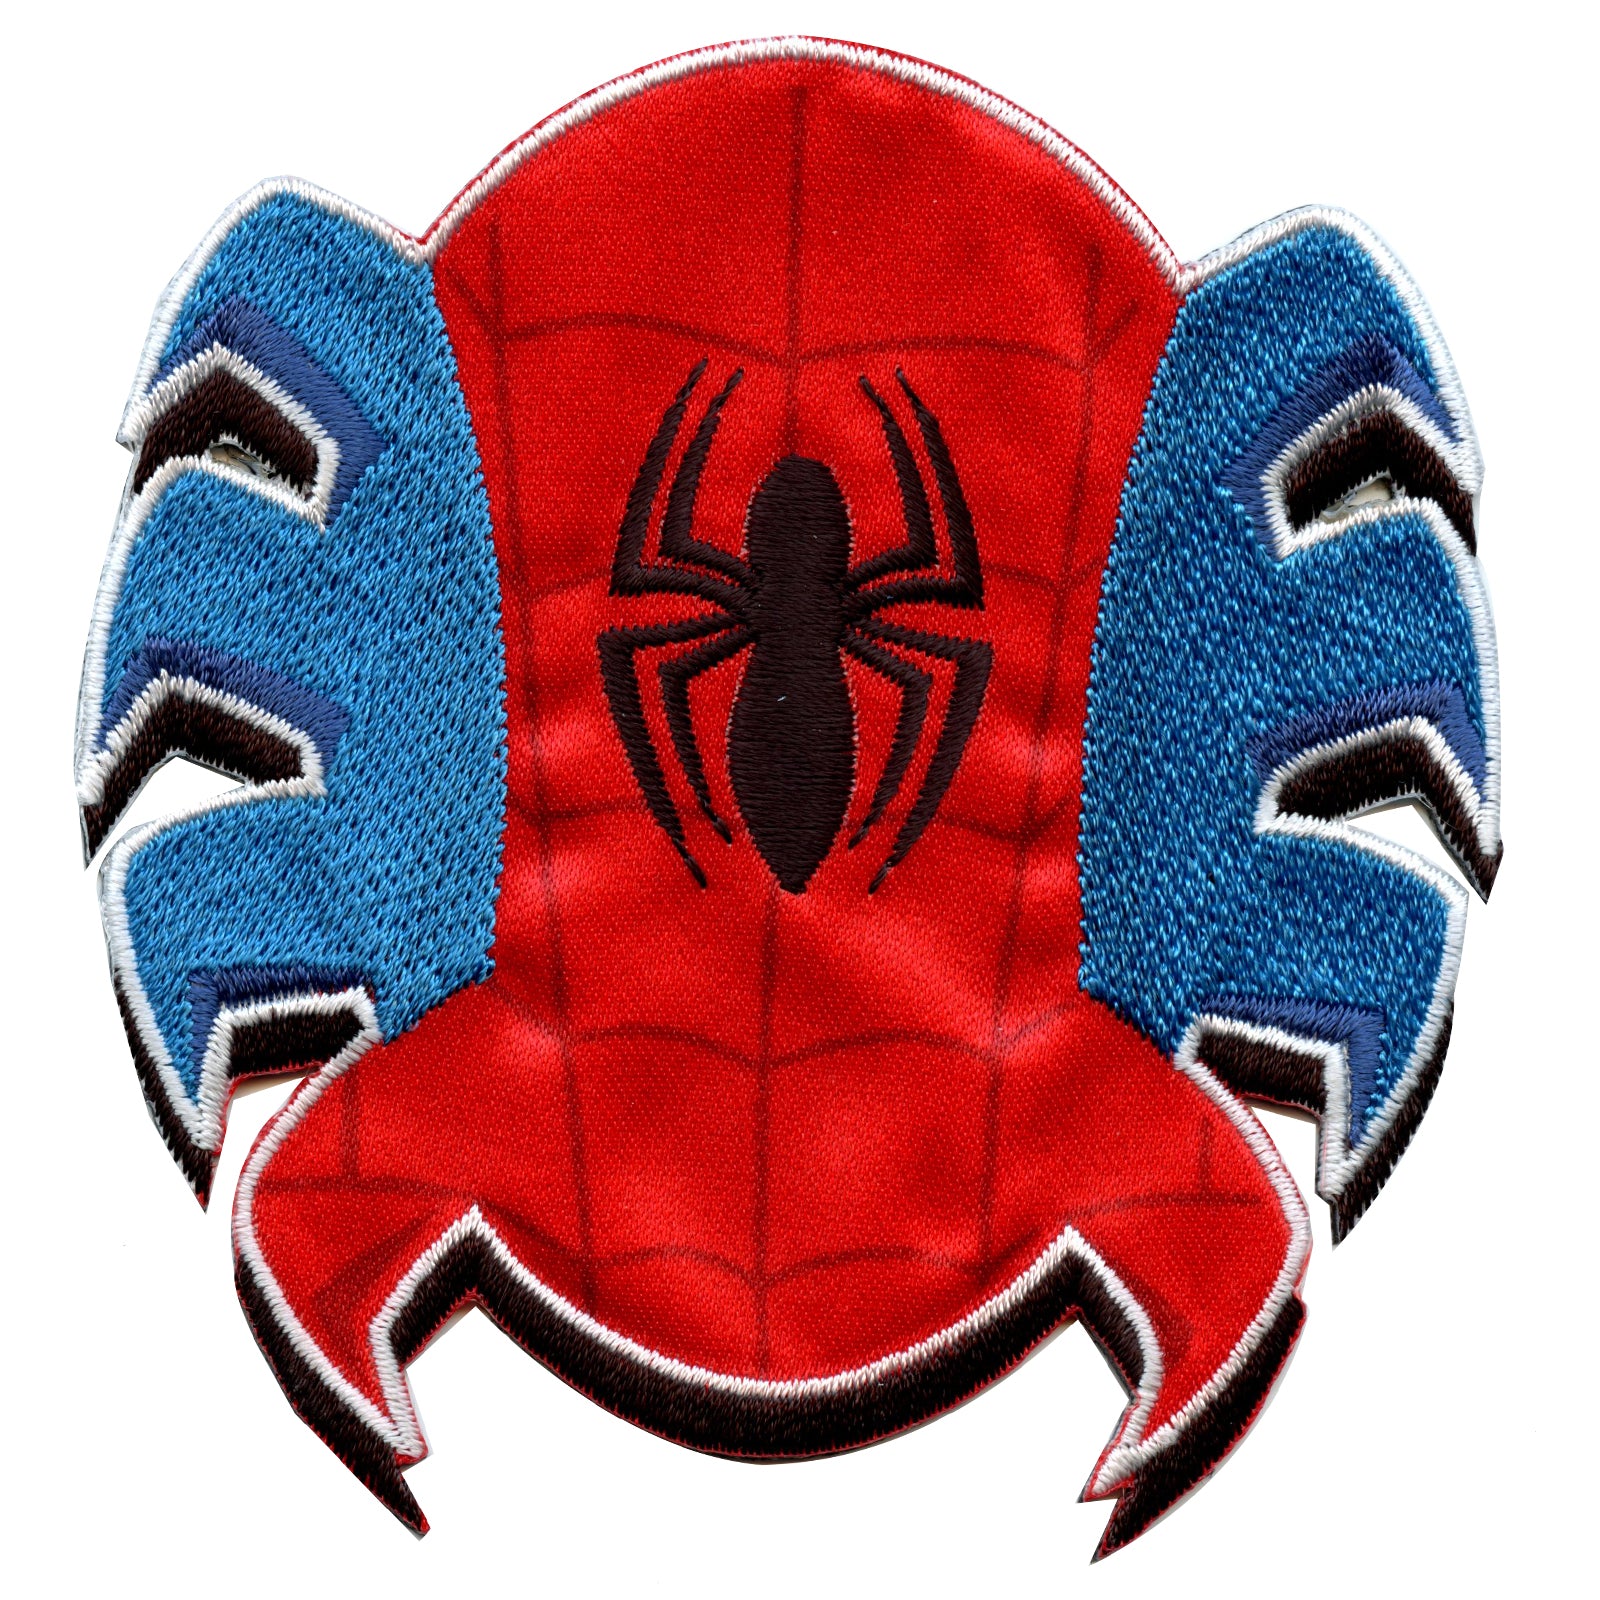 Spiderman Superhero Comics 3 1/2-inch Iron on Embroidered Applique Patch